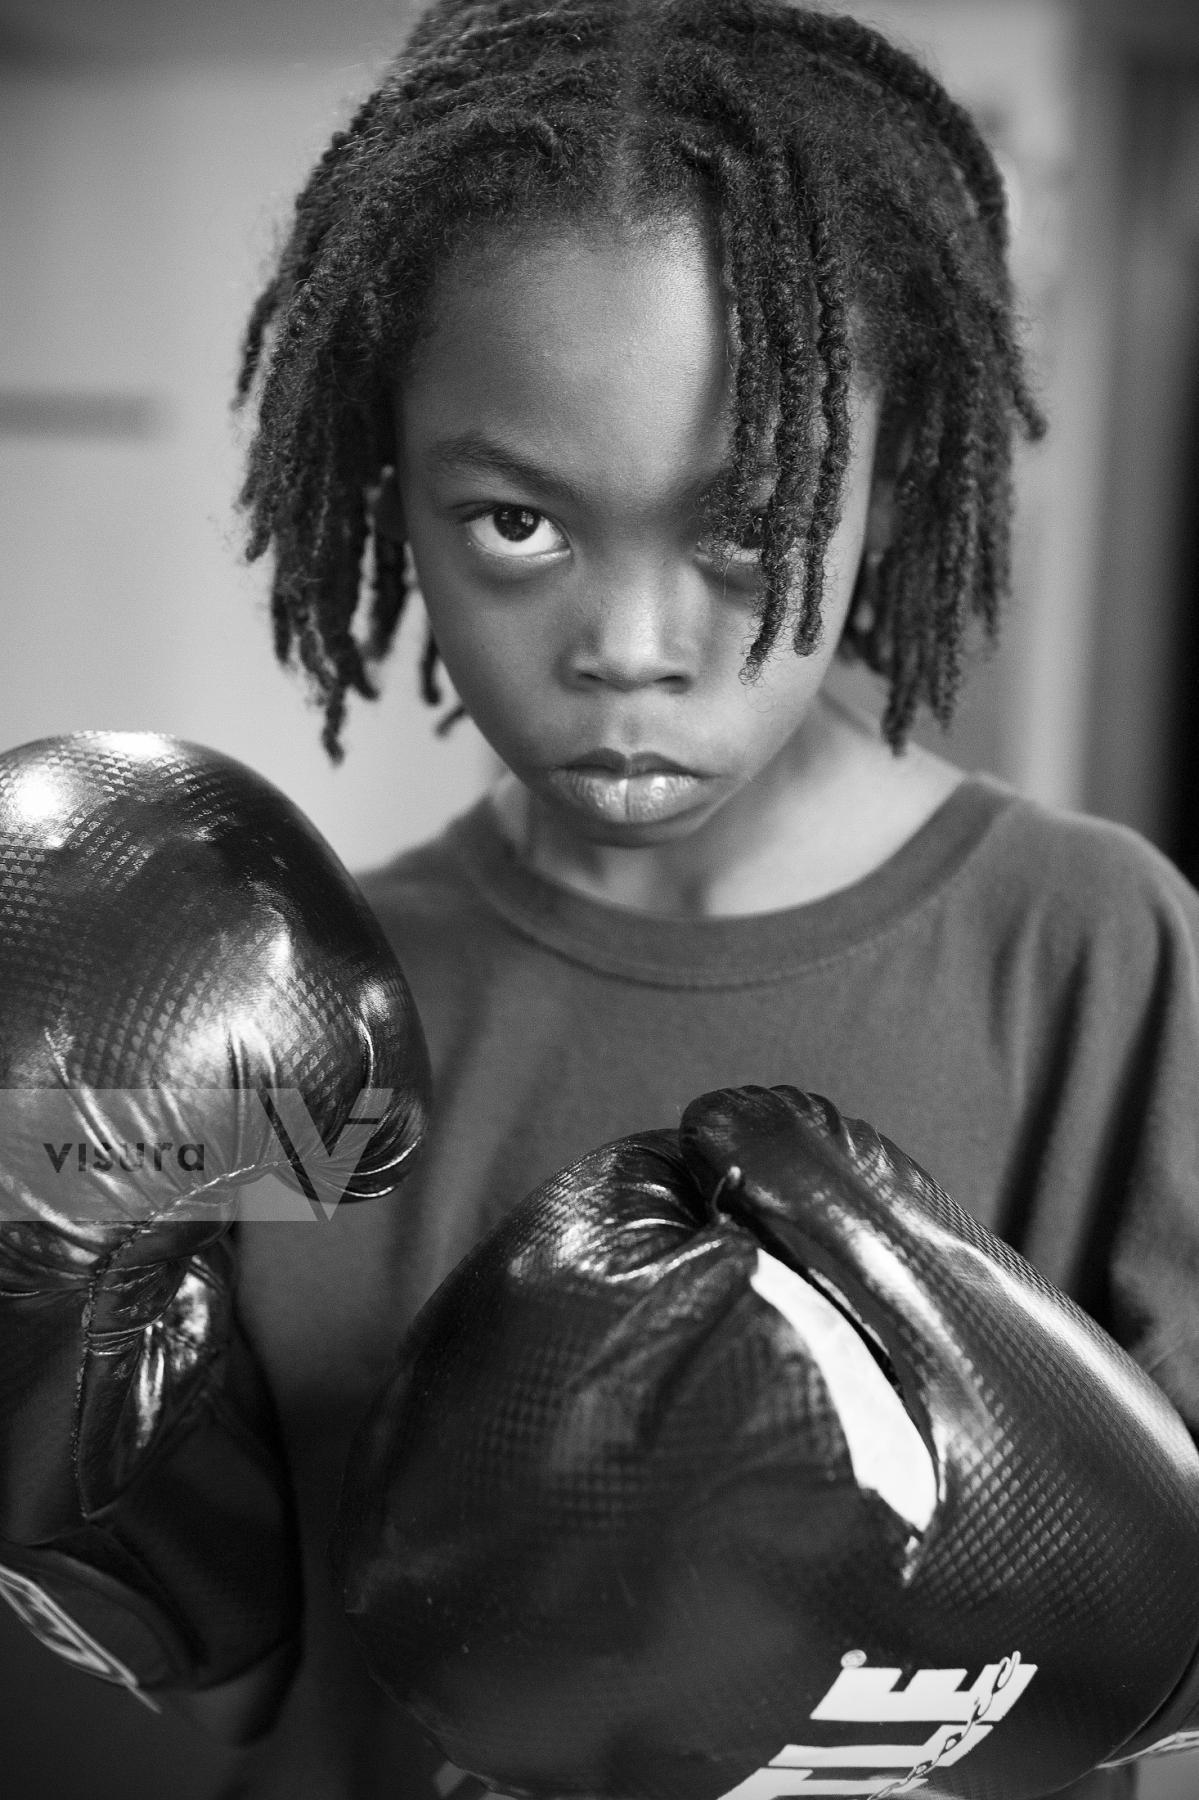 Purchase 10 years in a boxing gym by Jean-Marc Giboux